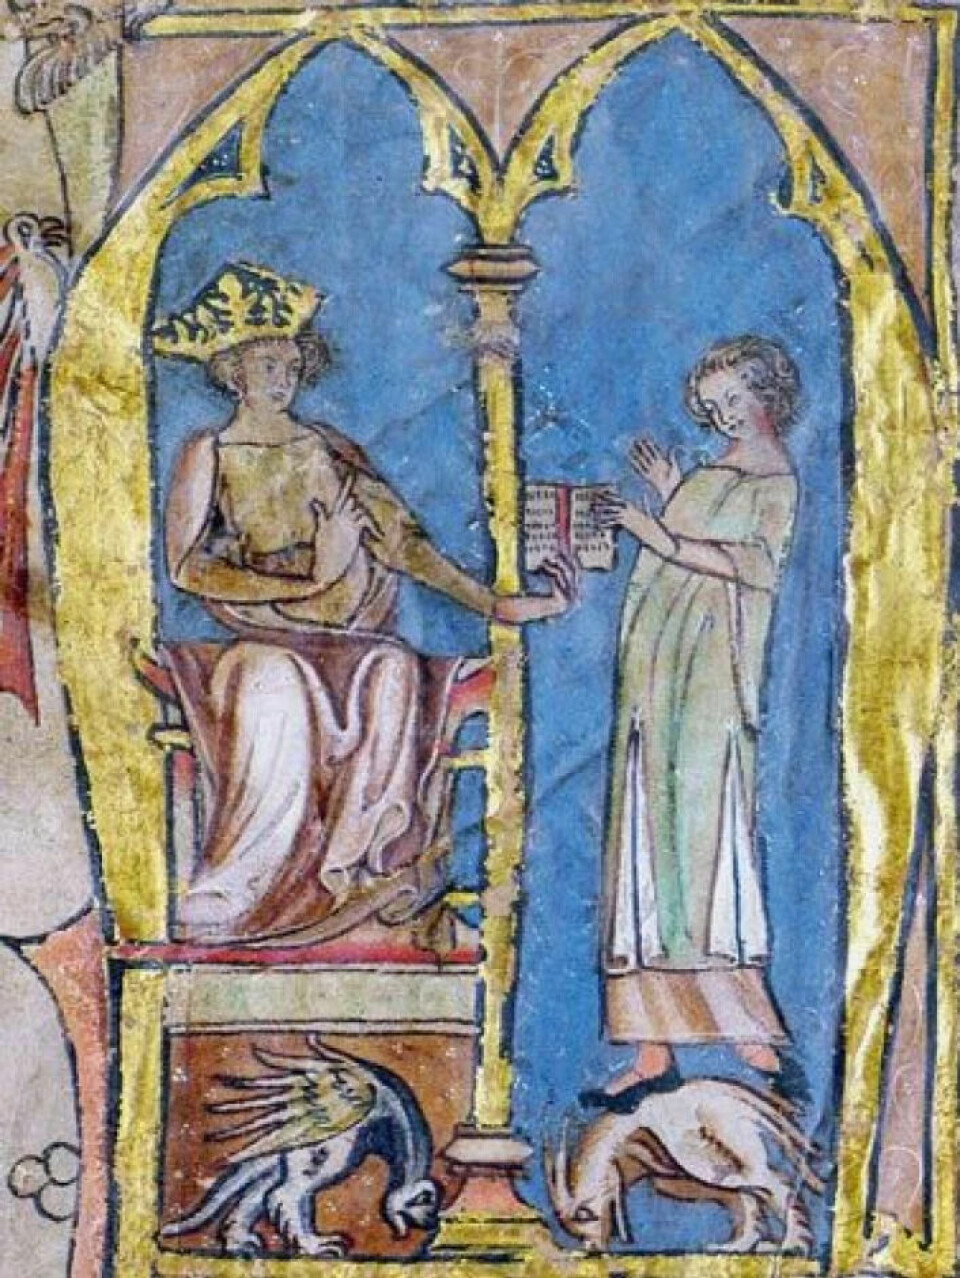 The illustration shows Magnus Lagabøte handing over the finished Code of the Realm to a judge.